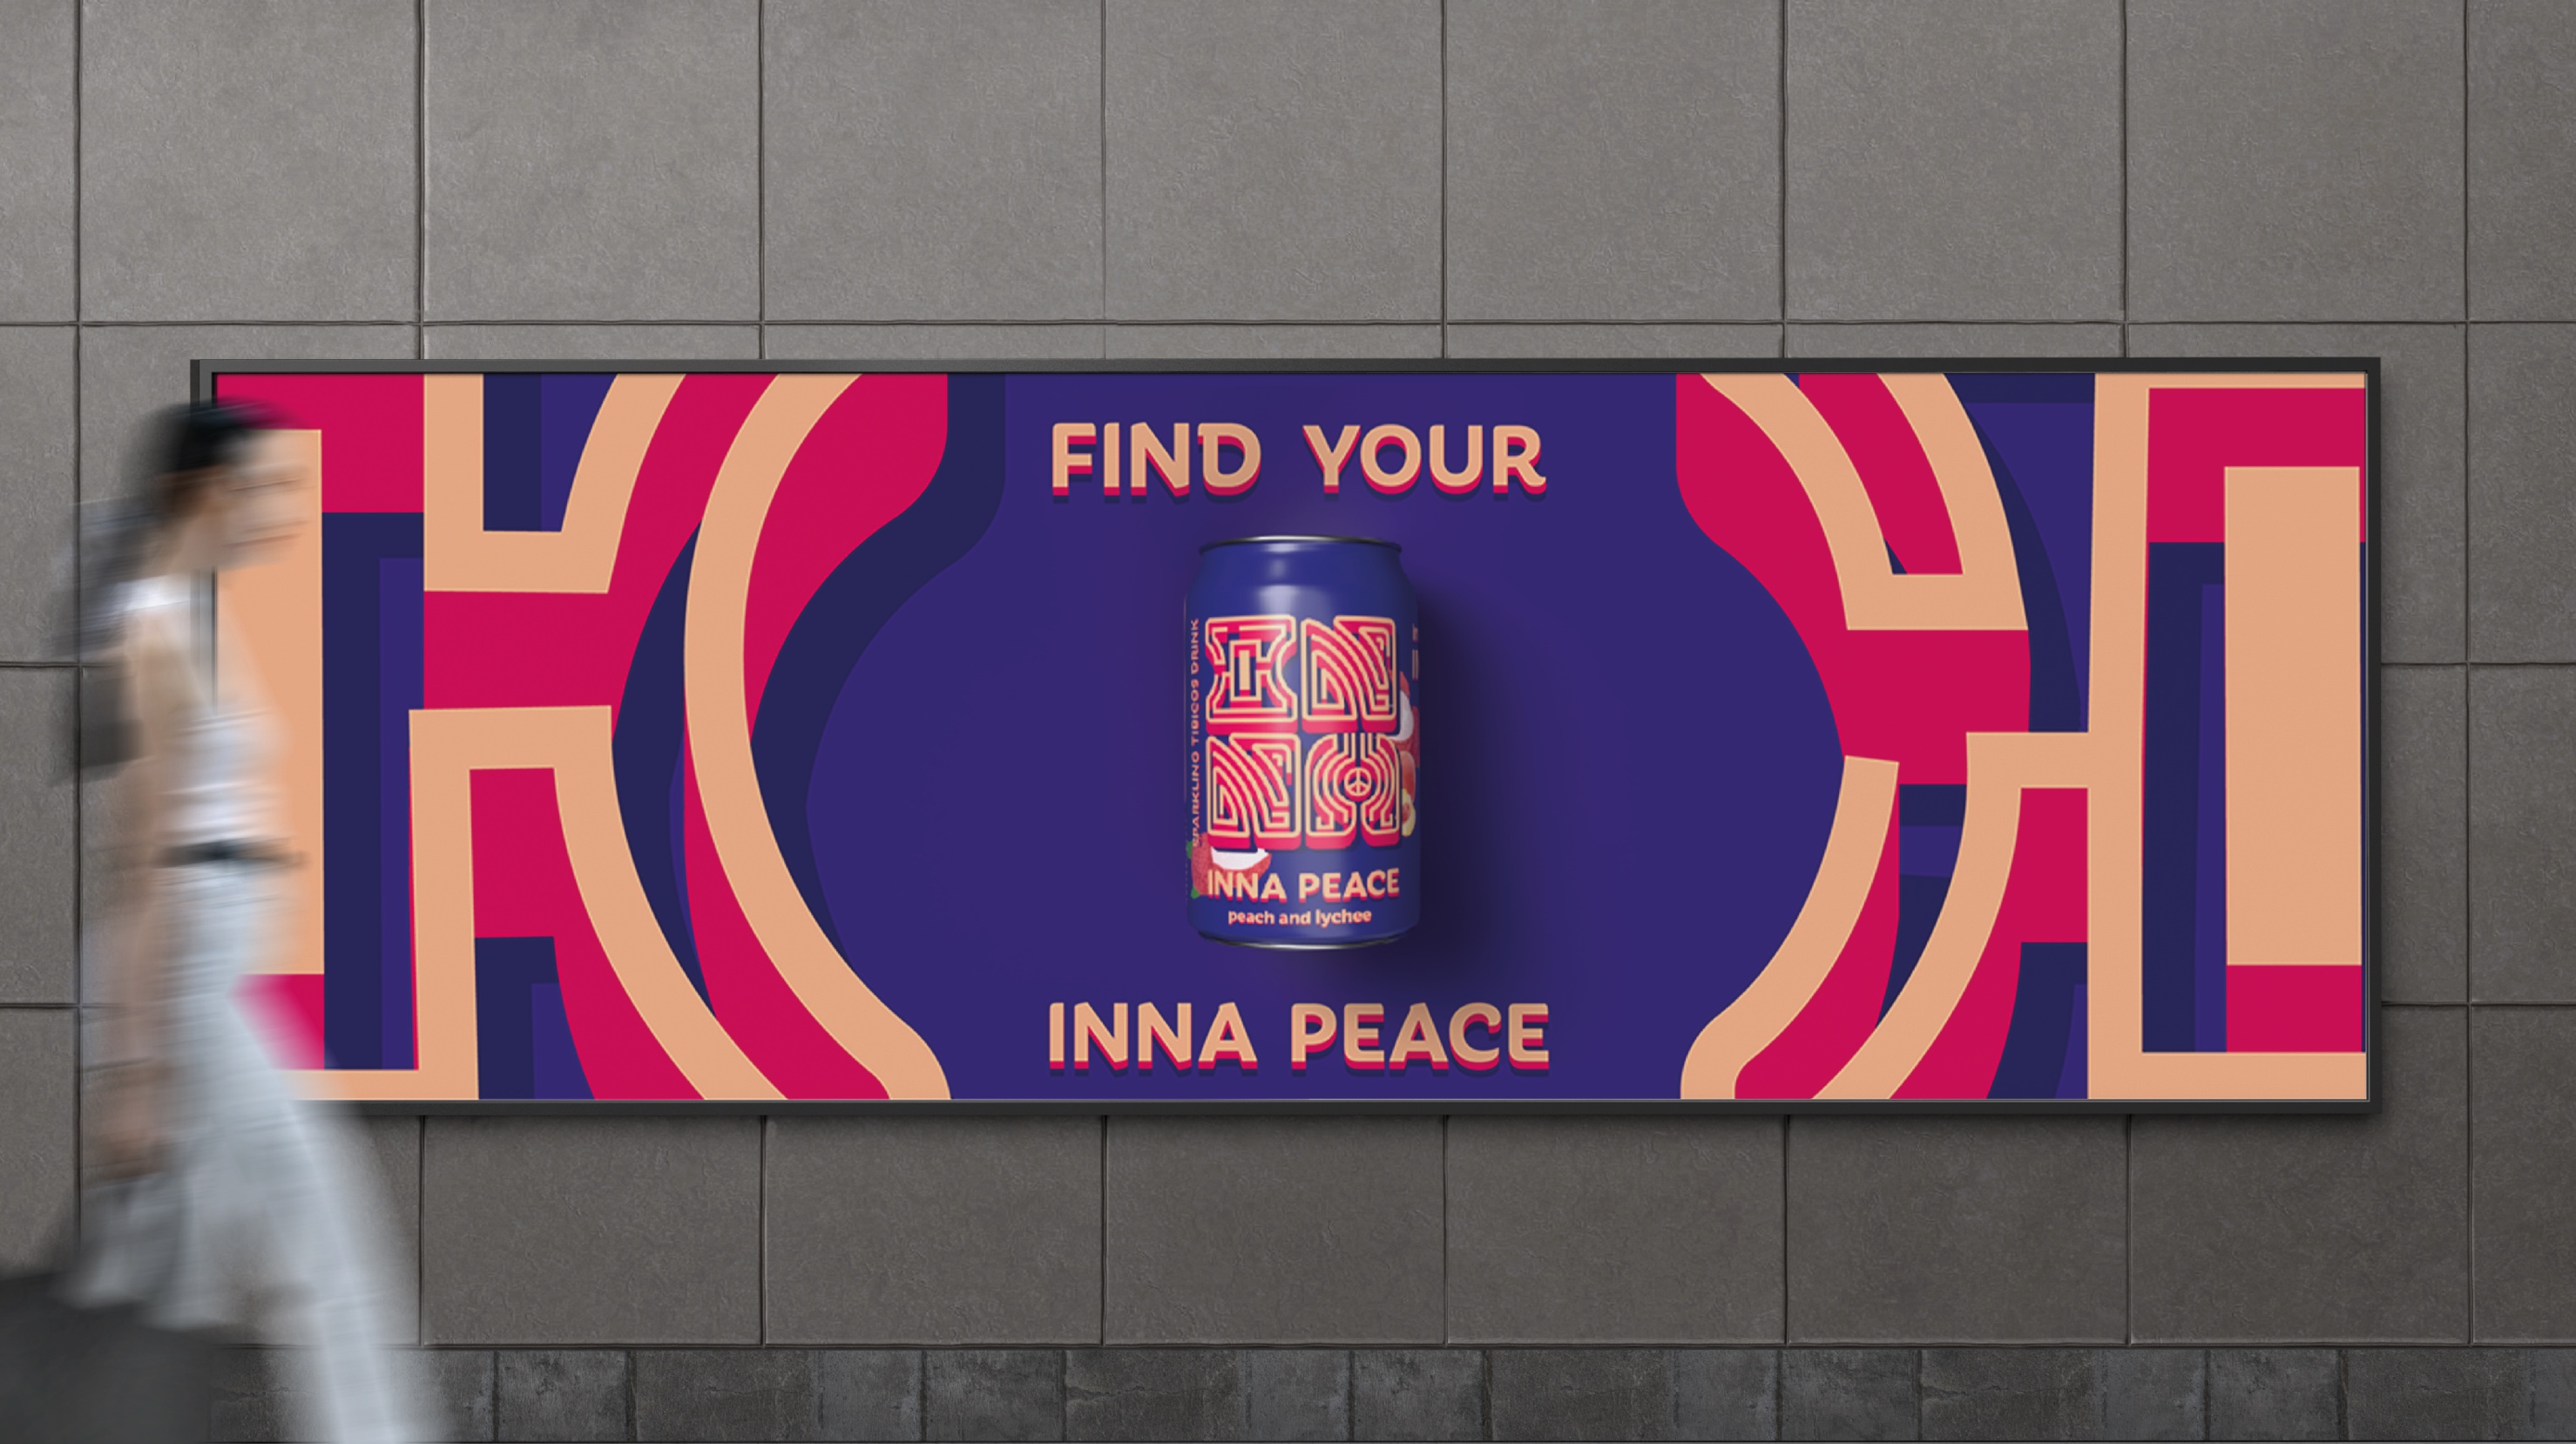 BA Graphic Design work by Kristina Roll showing advertising for the brand INNA